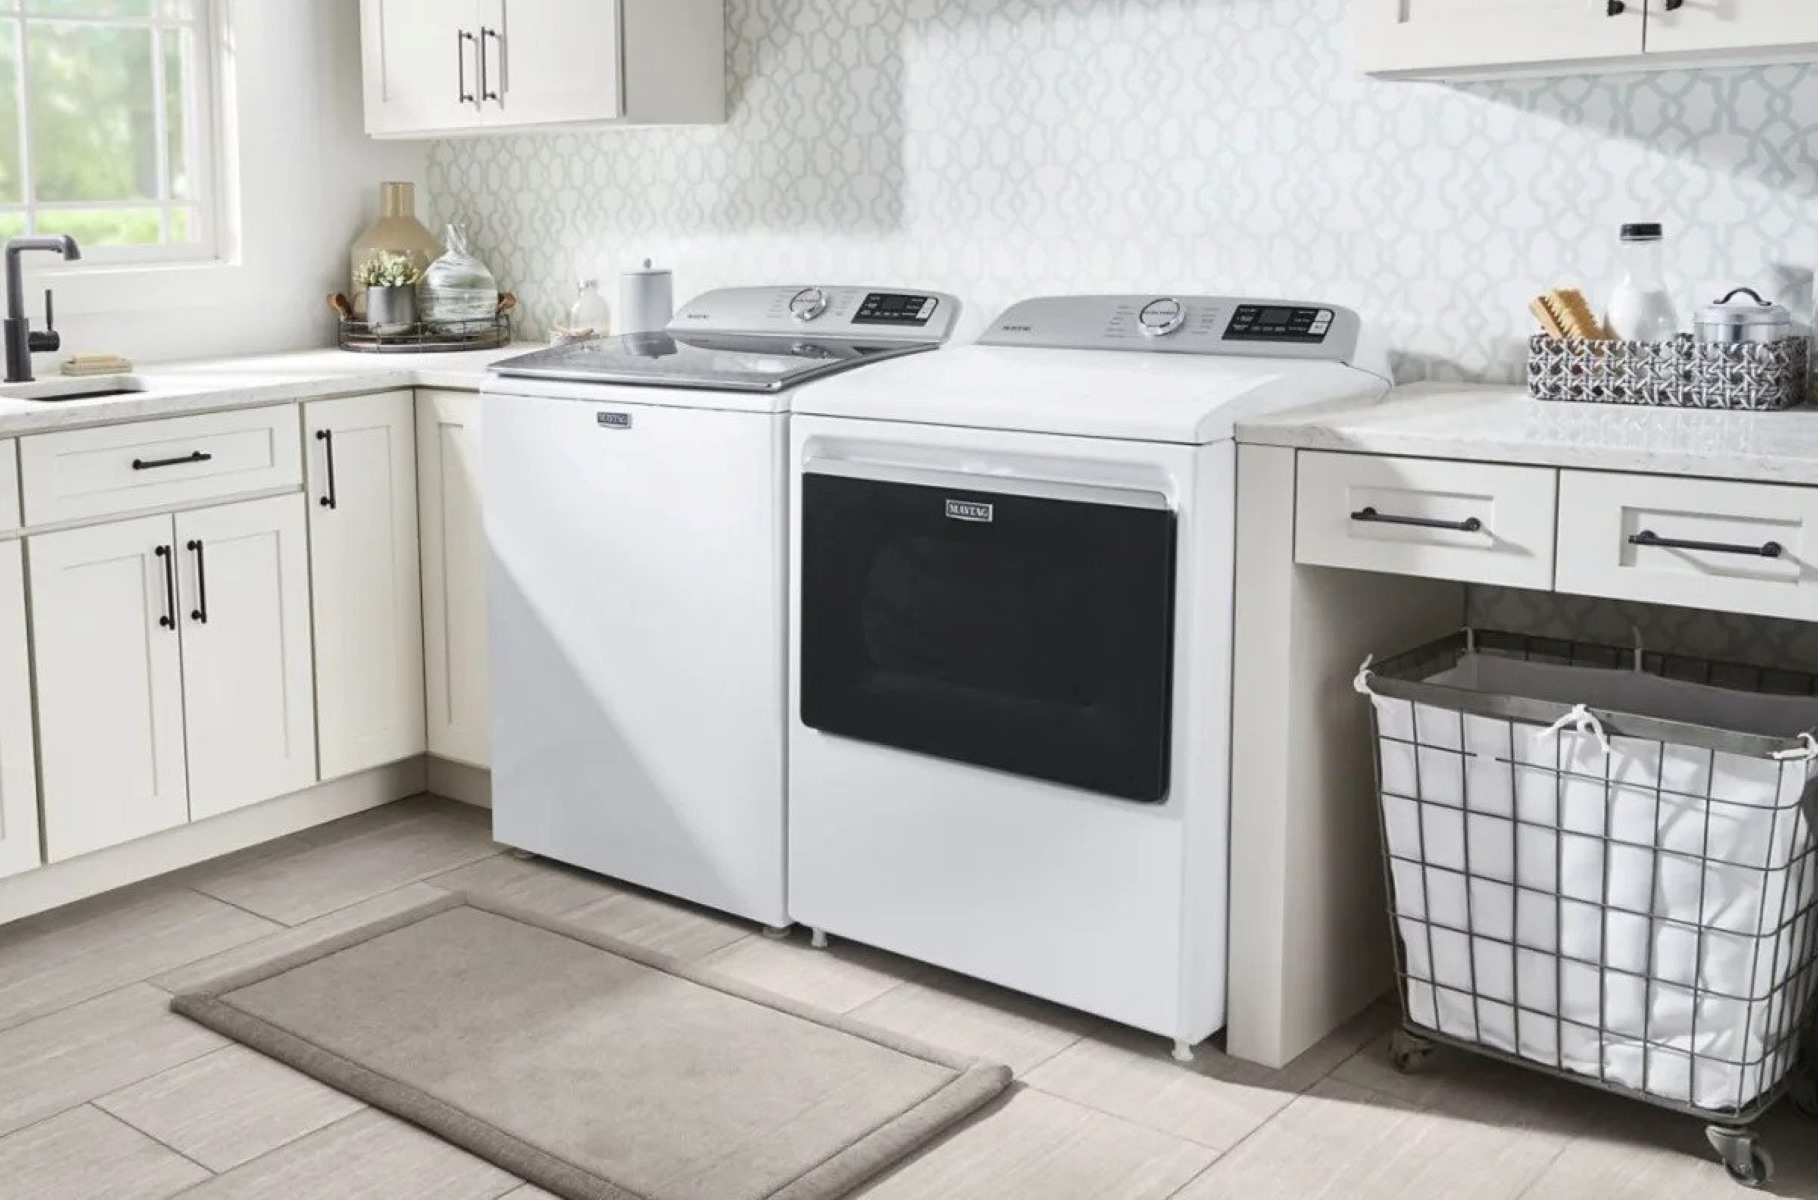 How To Fix The Error Code F74 For Maytag Dryer